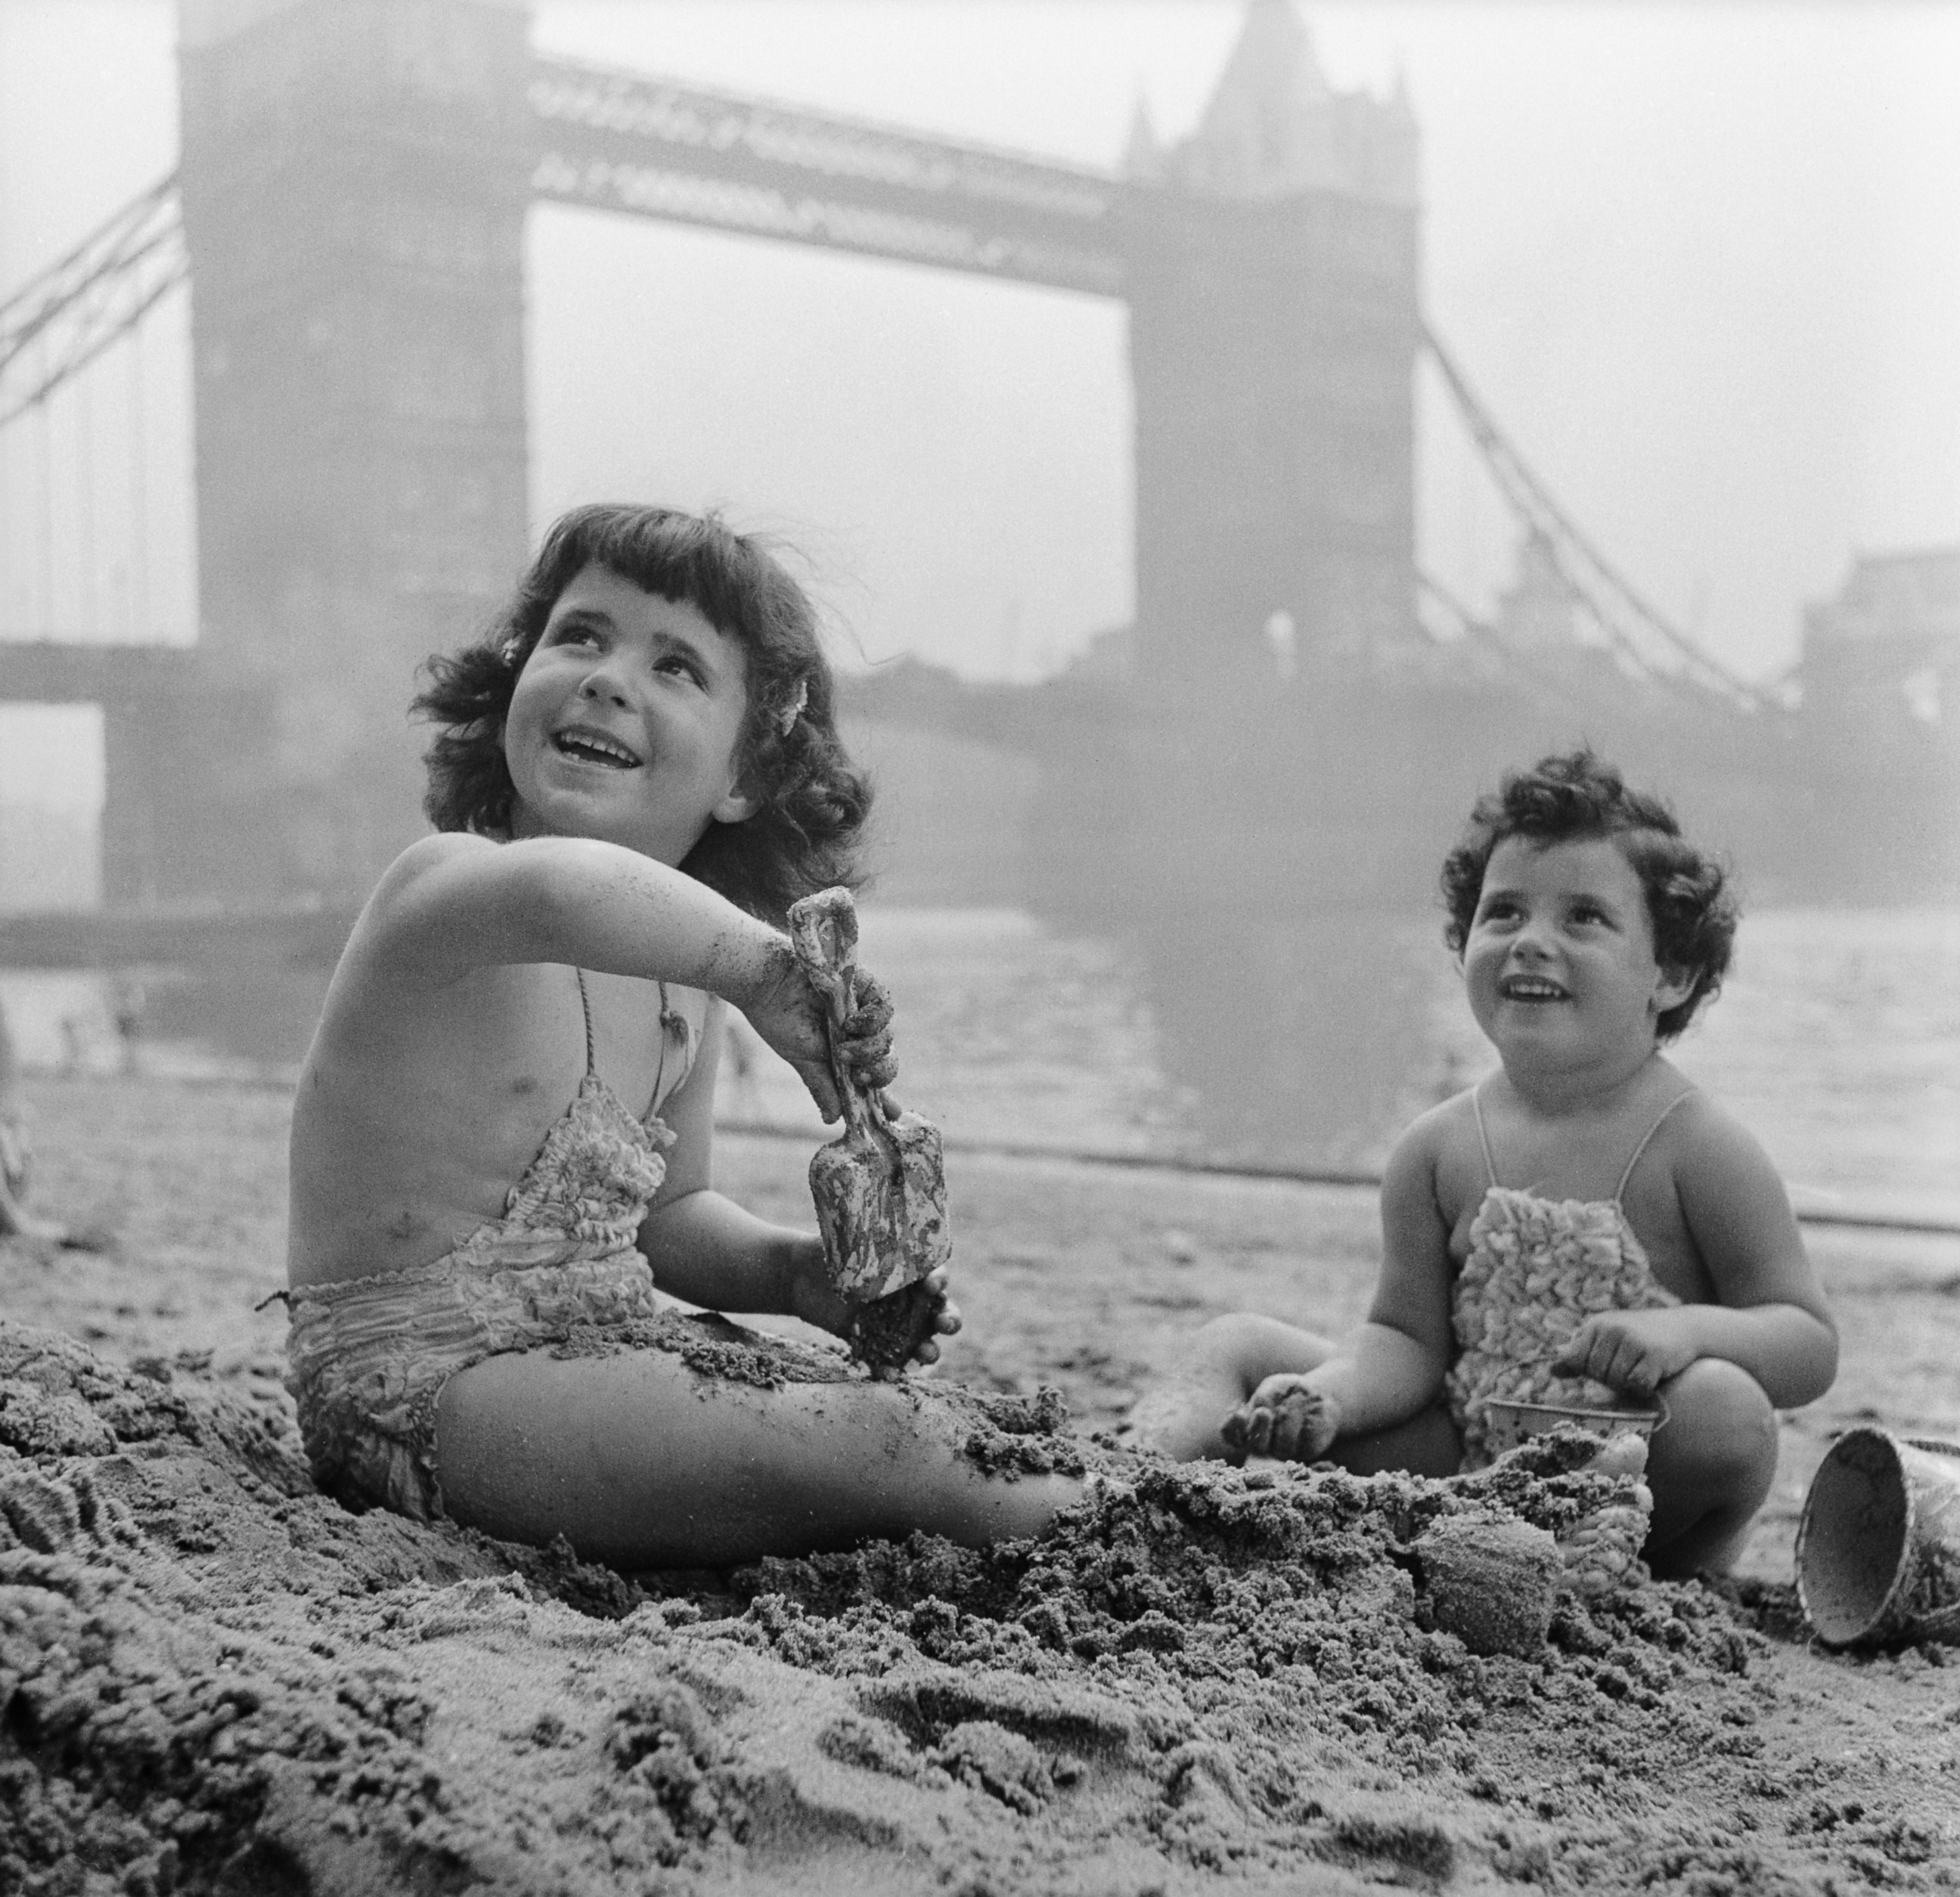 PHOTO: Two little girls playing in the sand on Tower Beach, near Tower Bridge on the River Thames